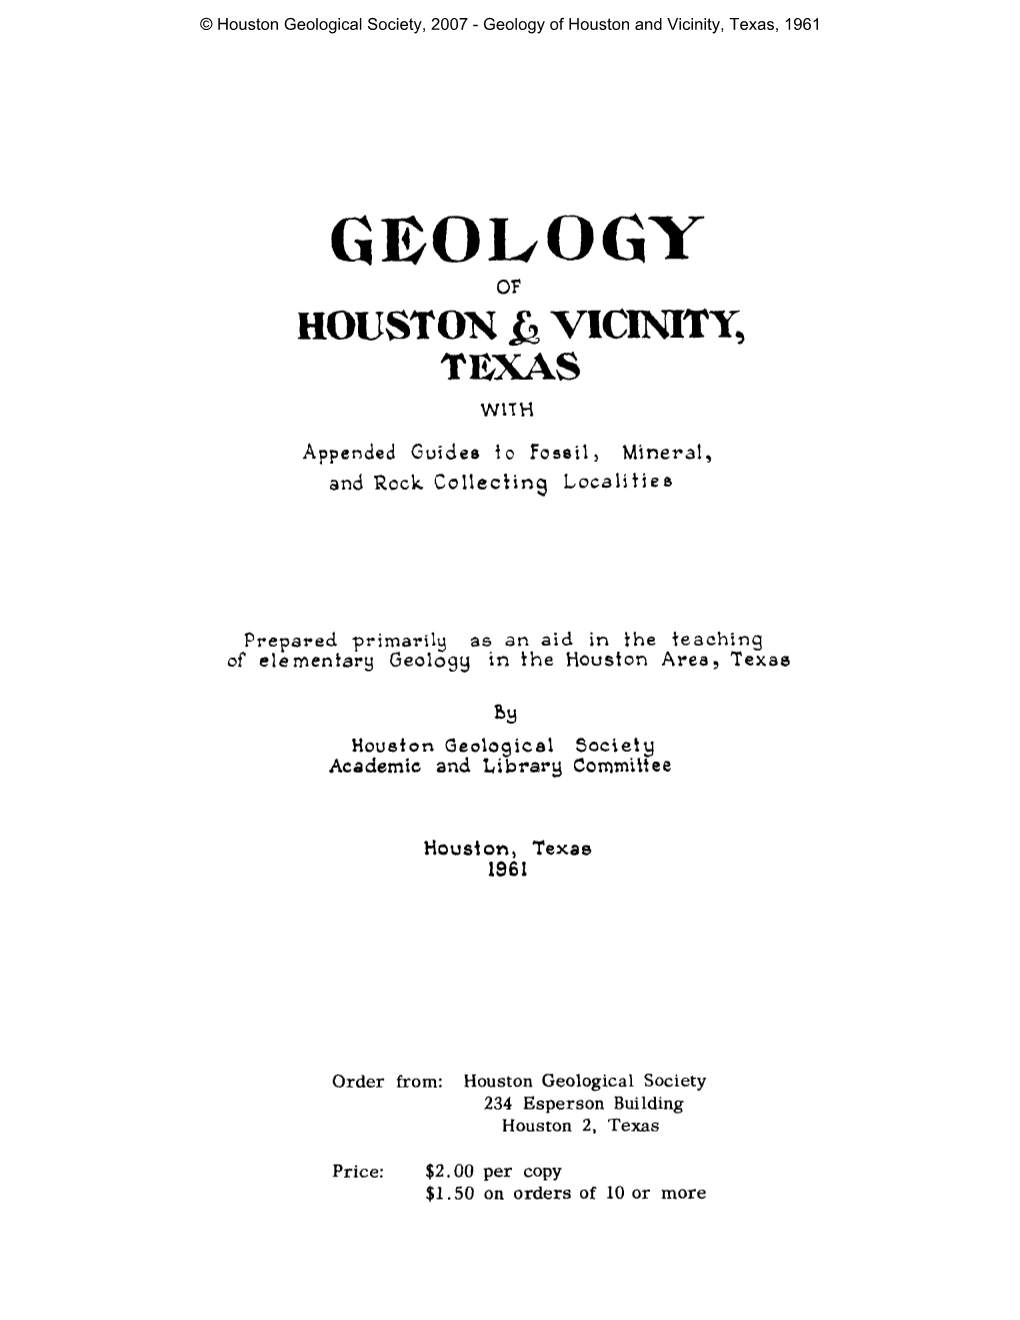 Geology of Houston and Vicinity, Texas, 1961